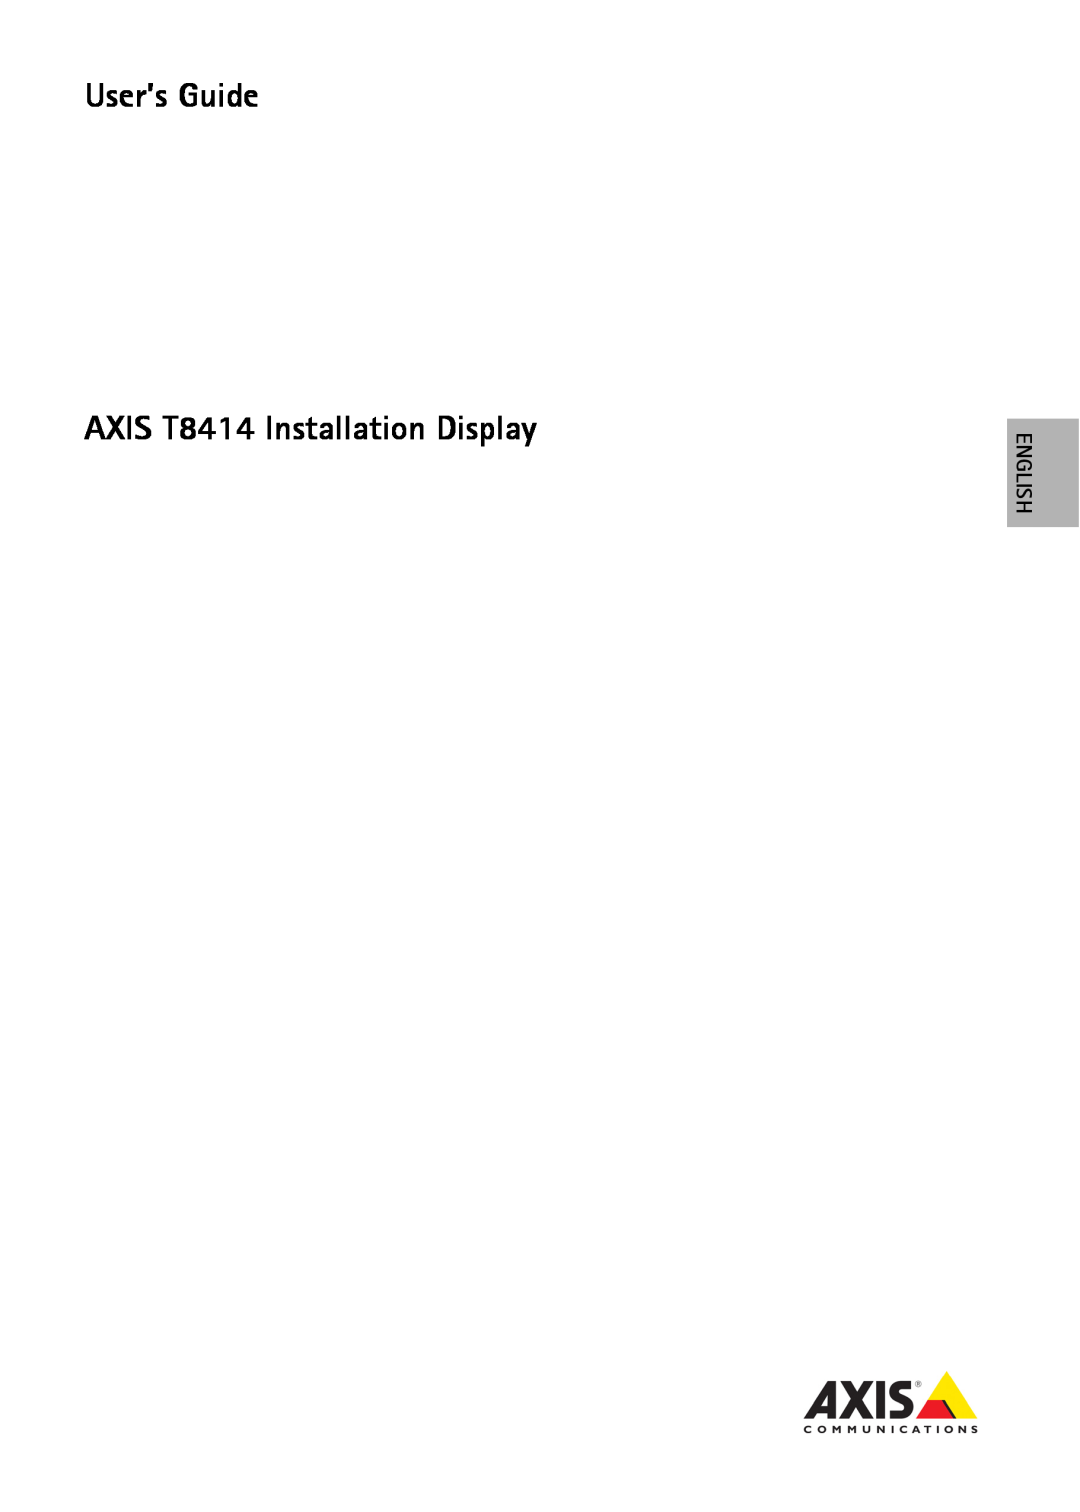 Axis Communications manual User’s Guide, AXIS T8414 Installation Display, English 